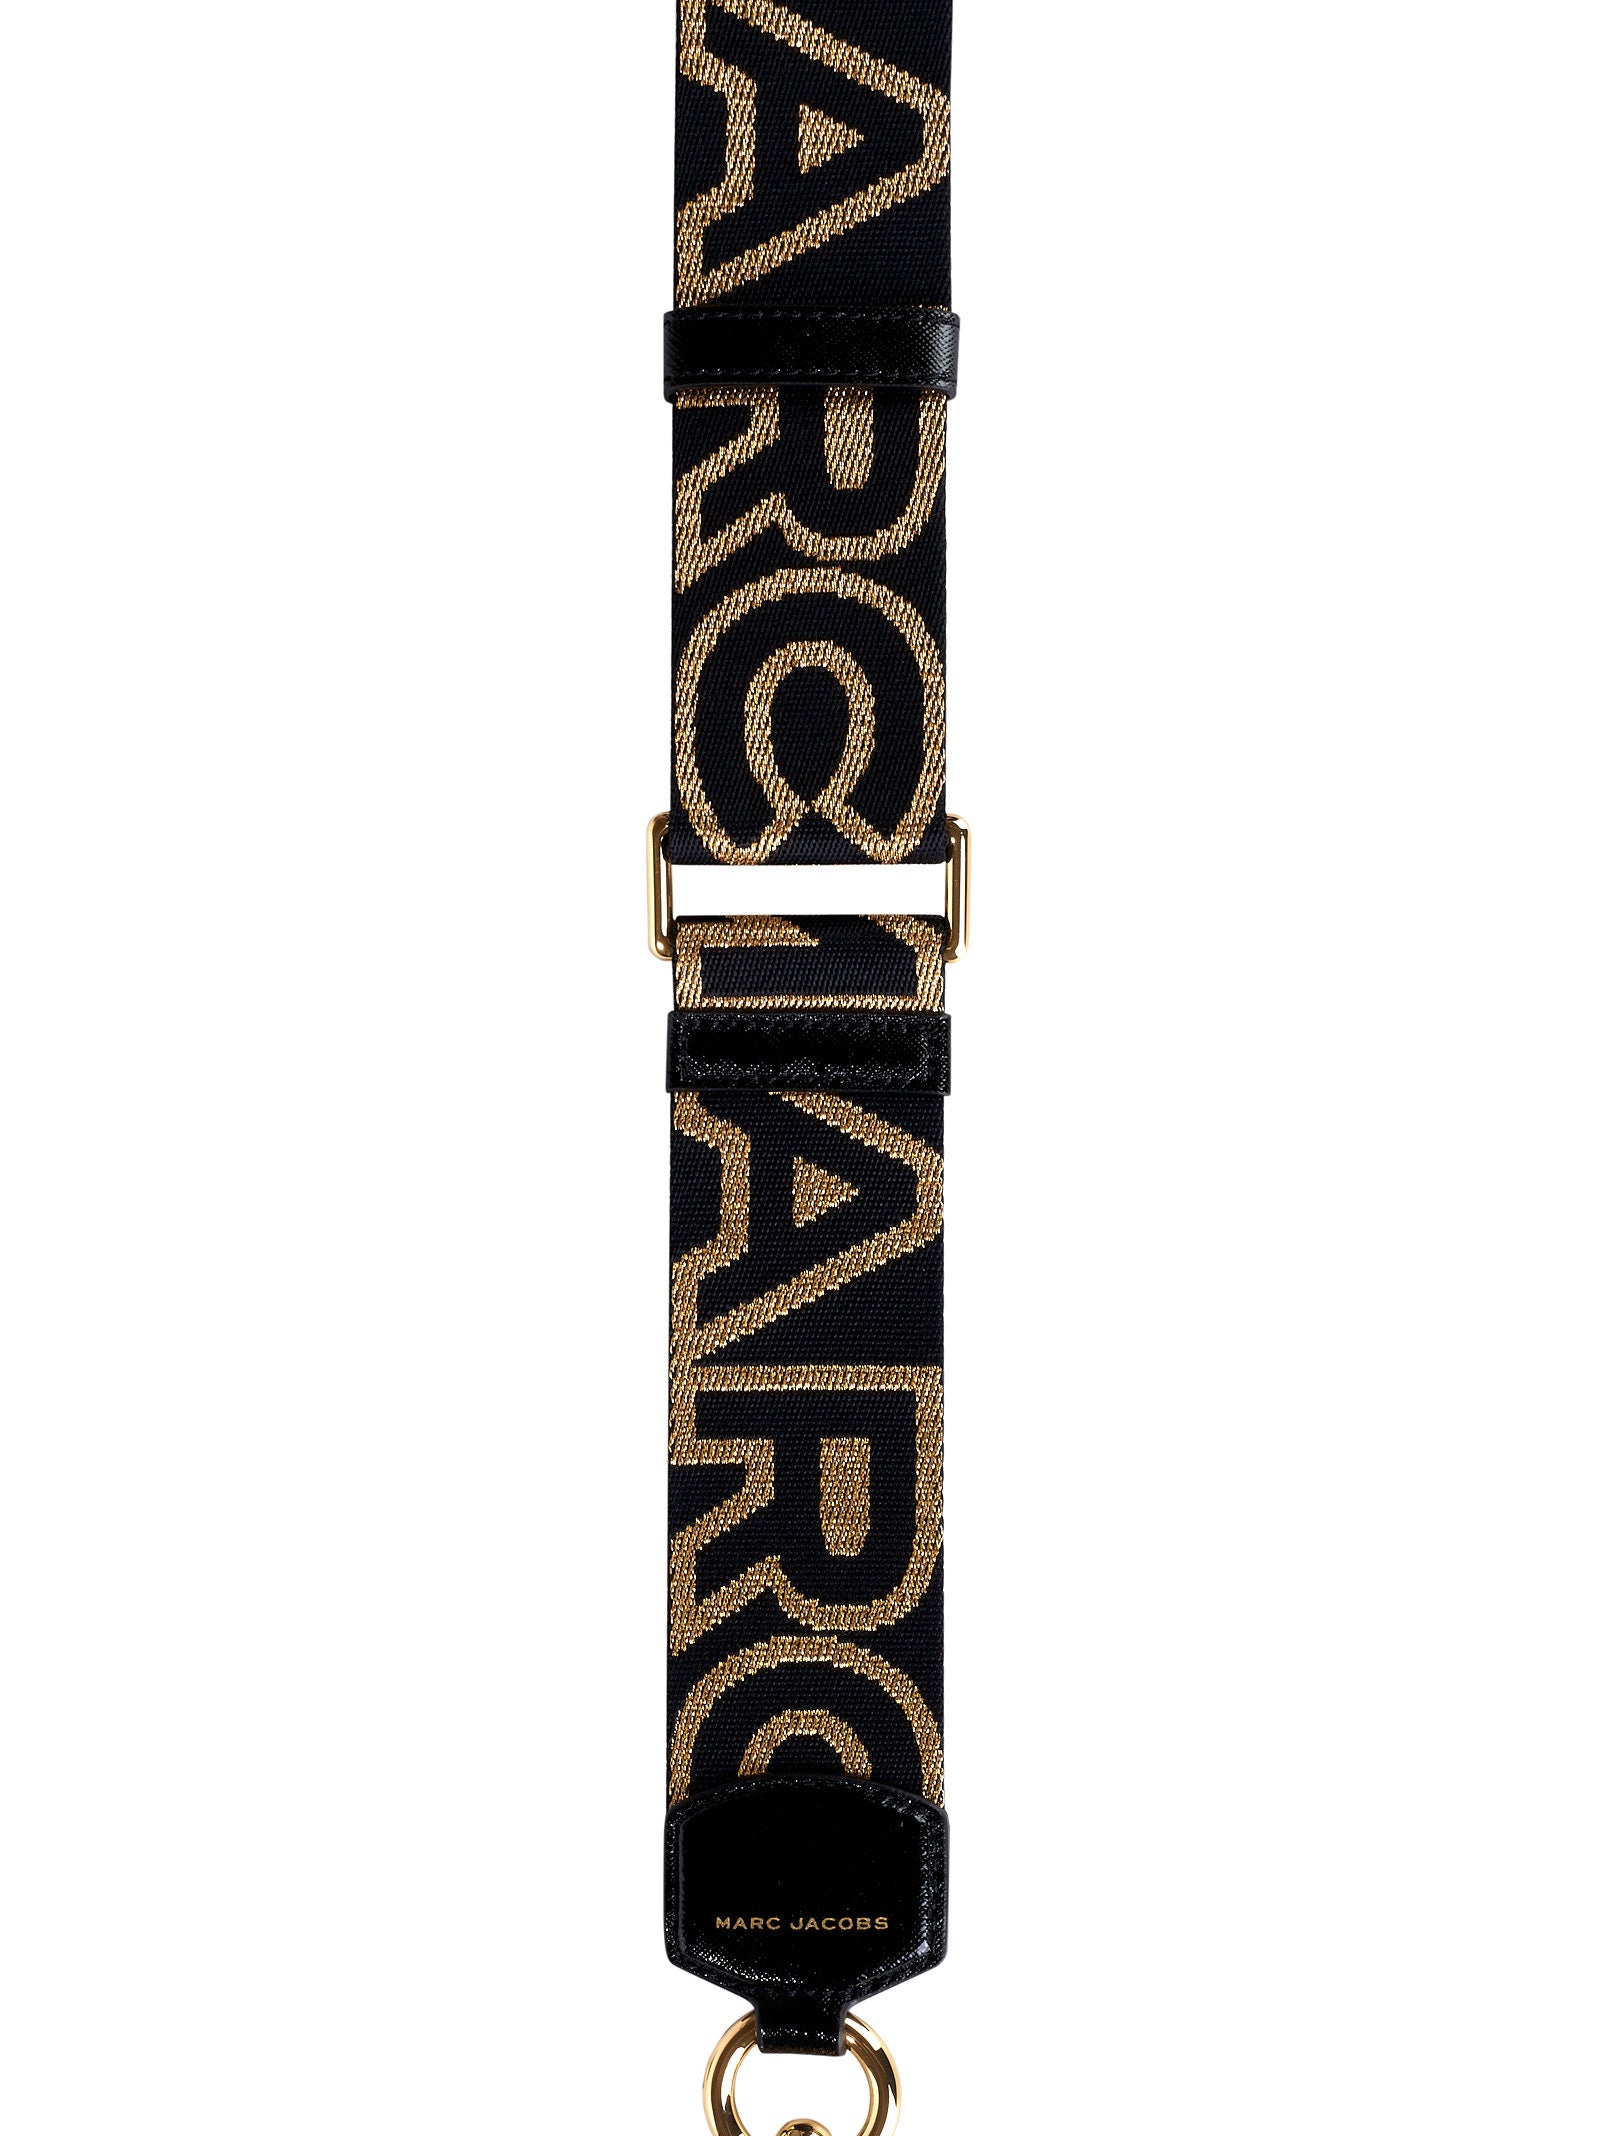 Tracolla MARC JACOBS Strap
Black/gold